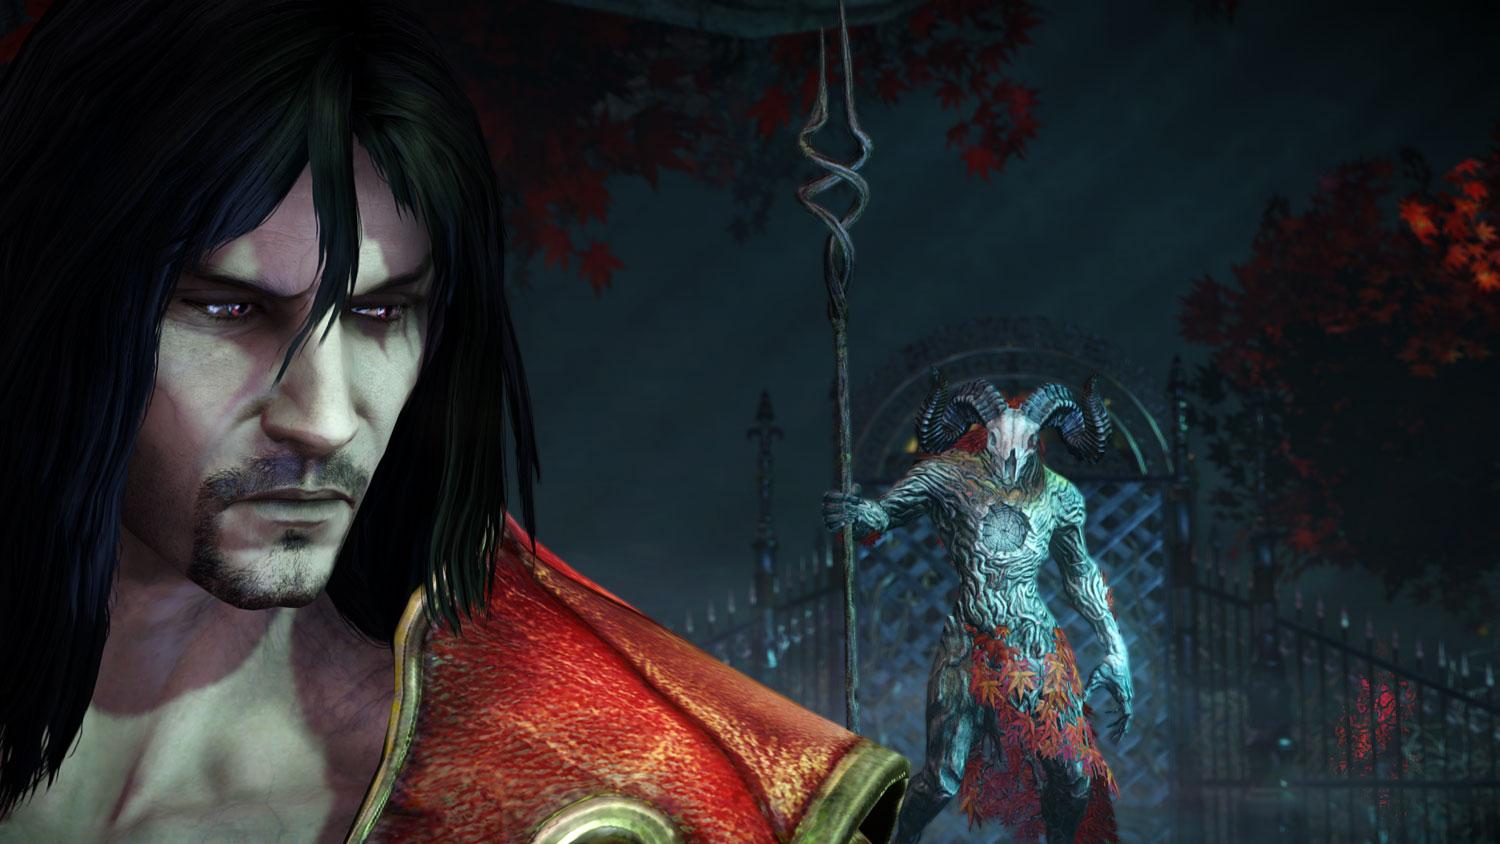 Castlevania: Lords of Shadow 2  Video Game Reviews and Previews